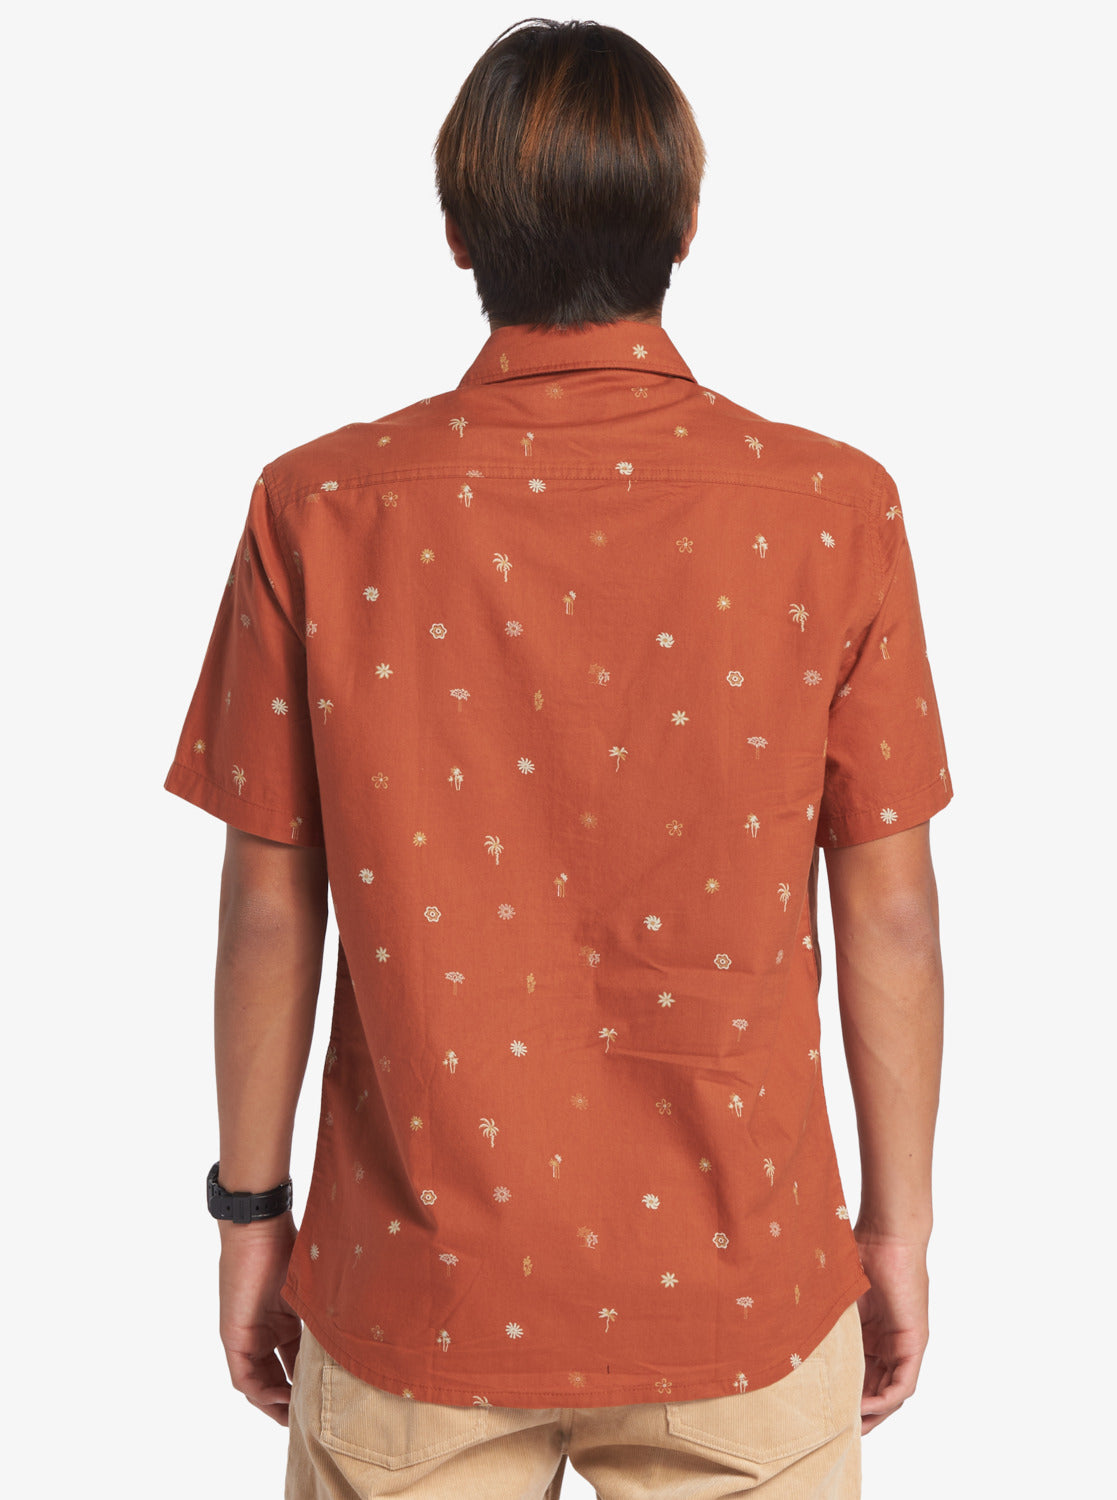 Quiksilver Heat Wave Short Sleeve Shirt in baked clay from rear